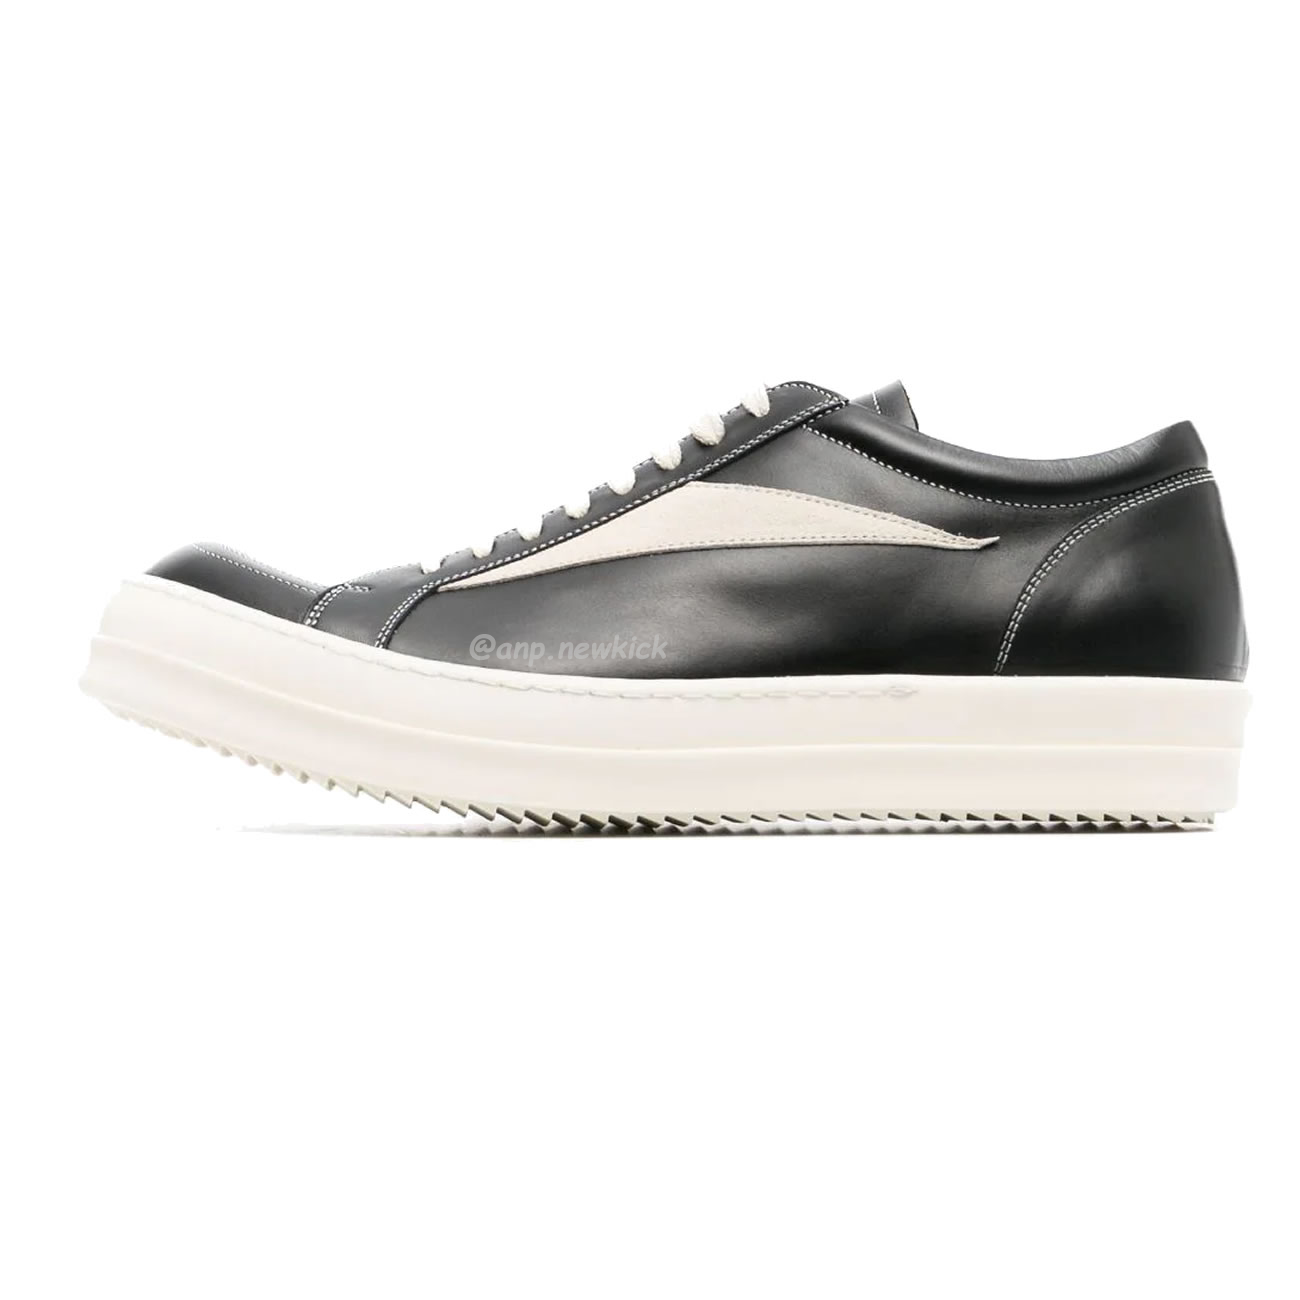 Rick Owens Leather Low Top Vintage Sneakers Suede Canvas Black Taupe Grey Faded Pnk Pearl Milk Dark Dust (36) - newkick.org